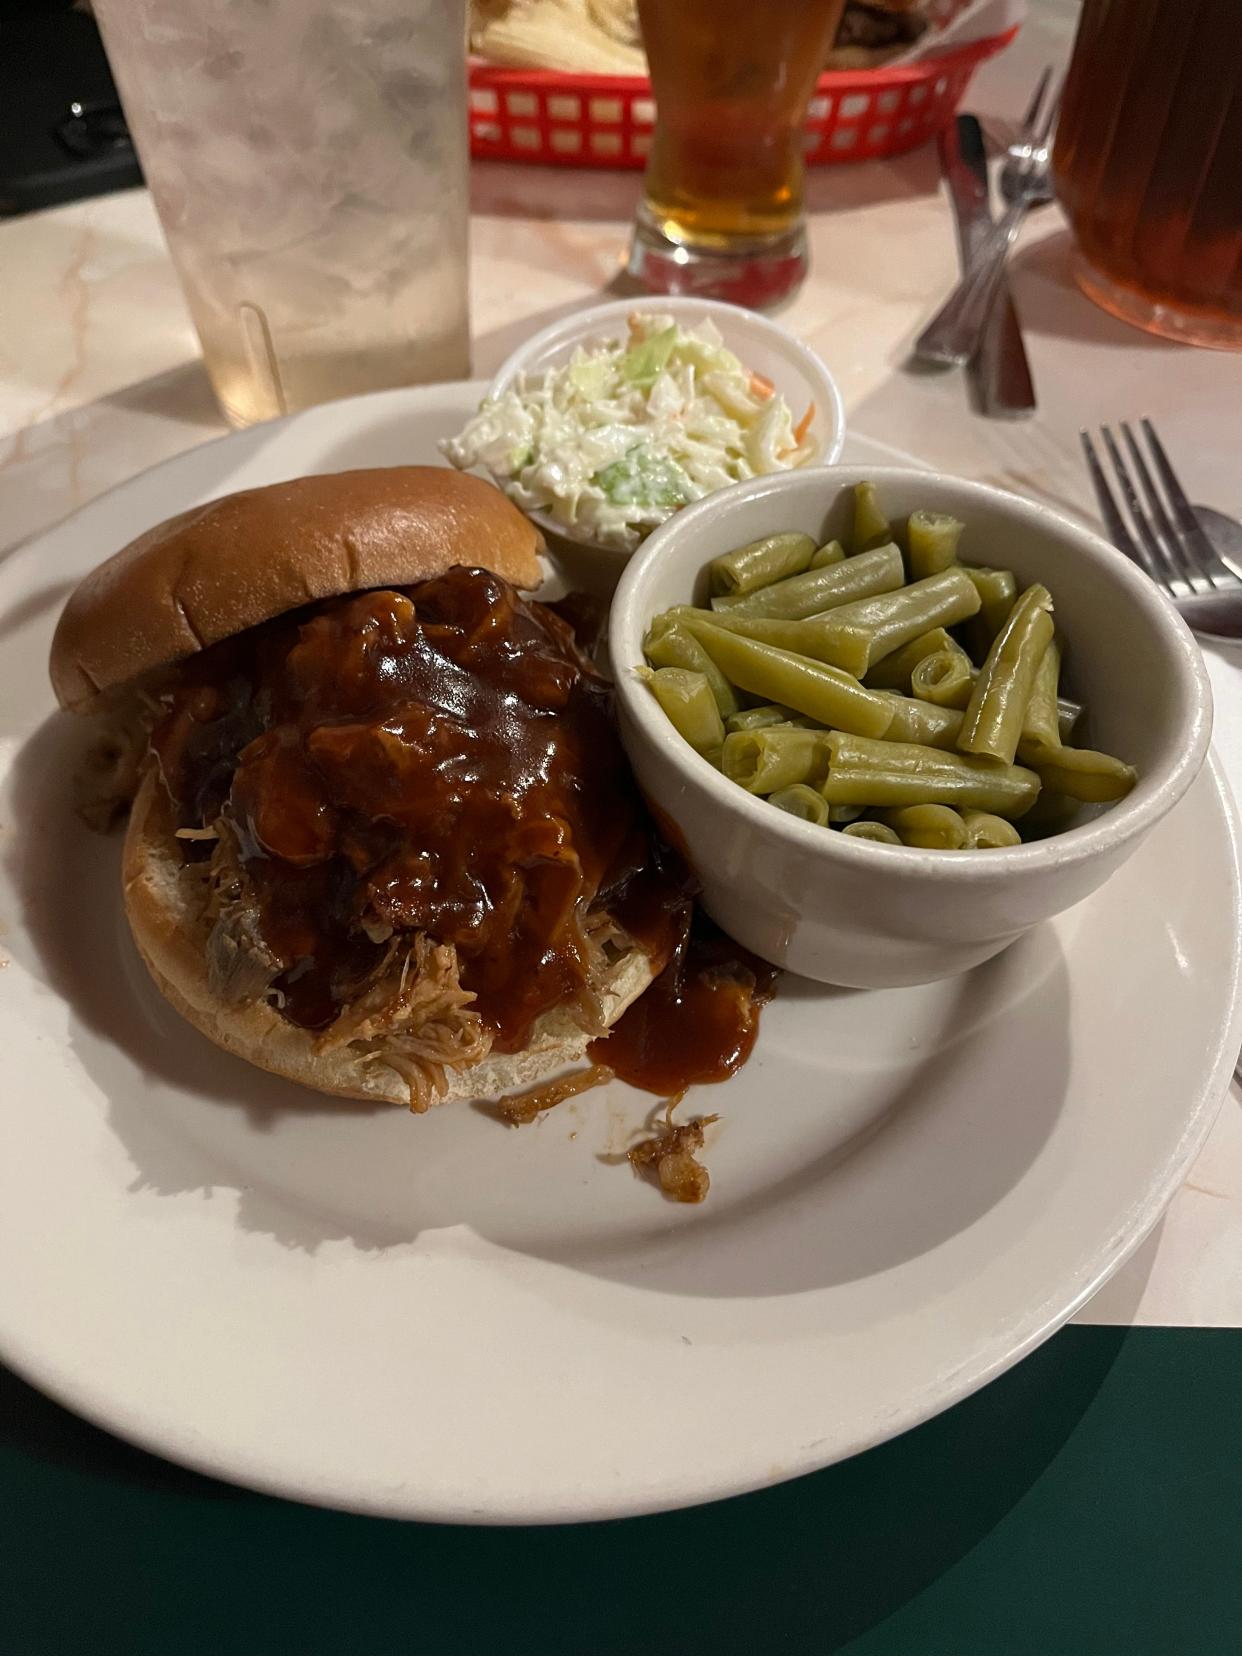 The Whisky's BBQ Sandwich at Friendly Stop Bar & Grill comes with coleslaw and a bag of chips. It costs $10.